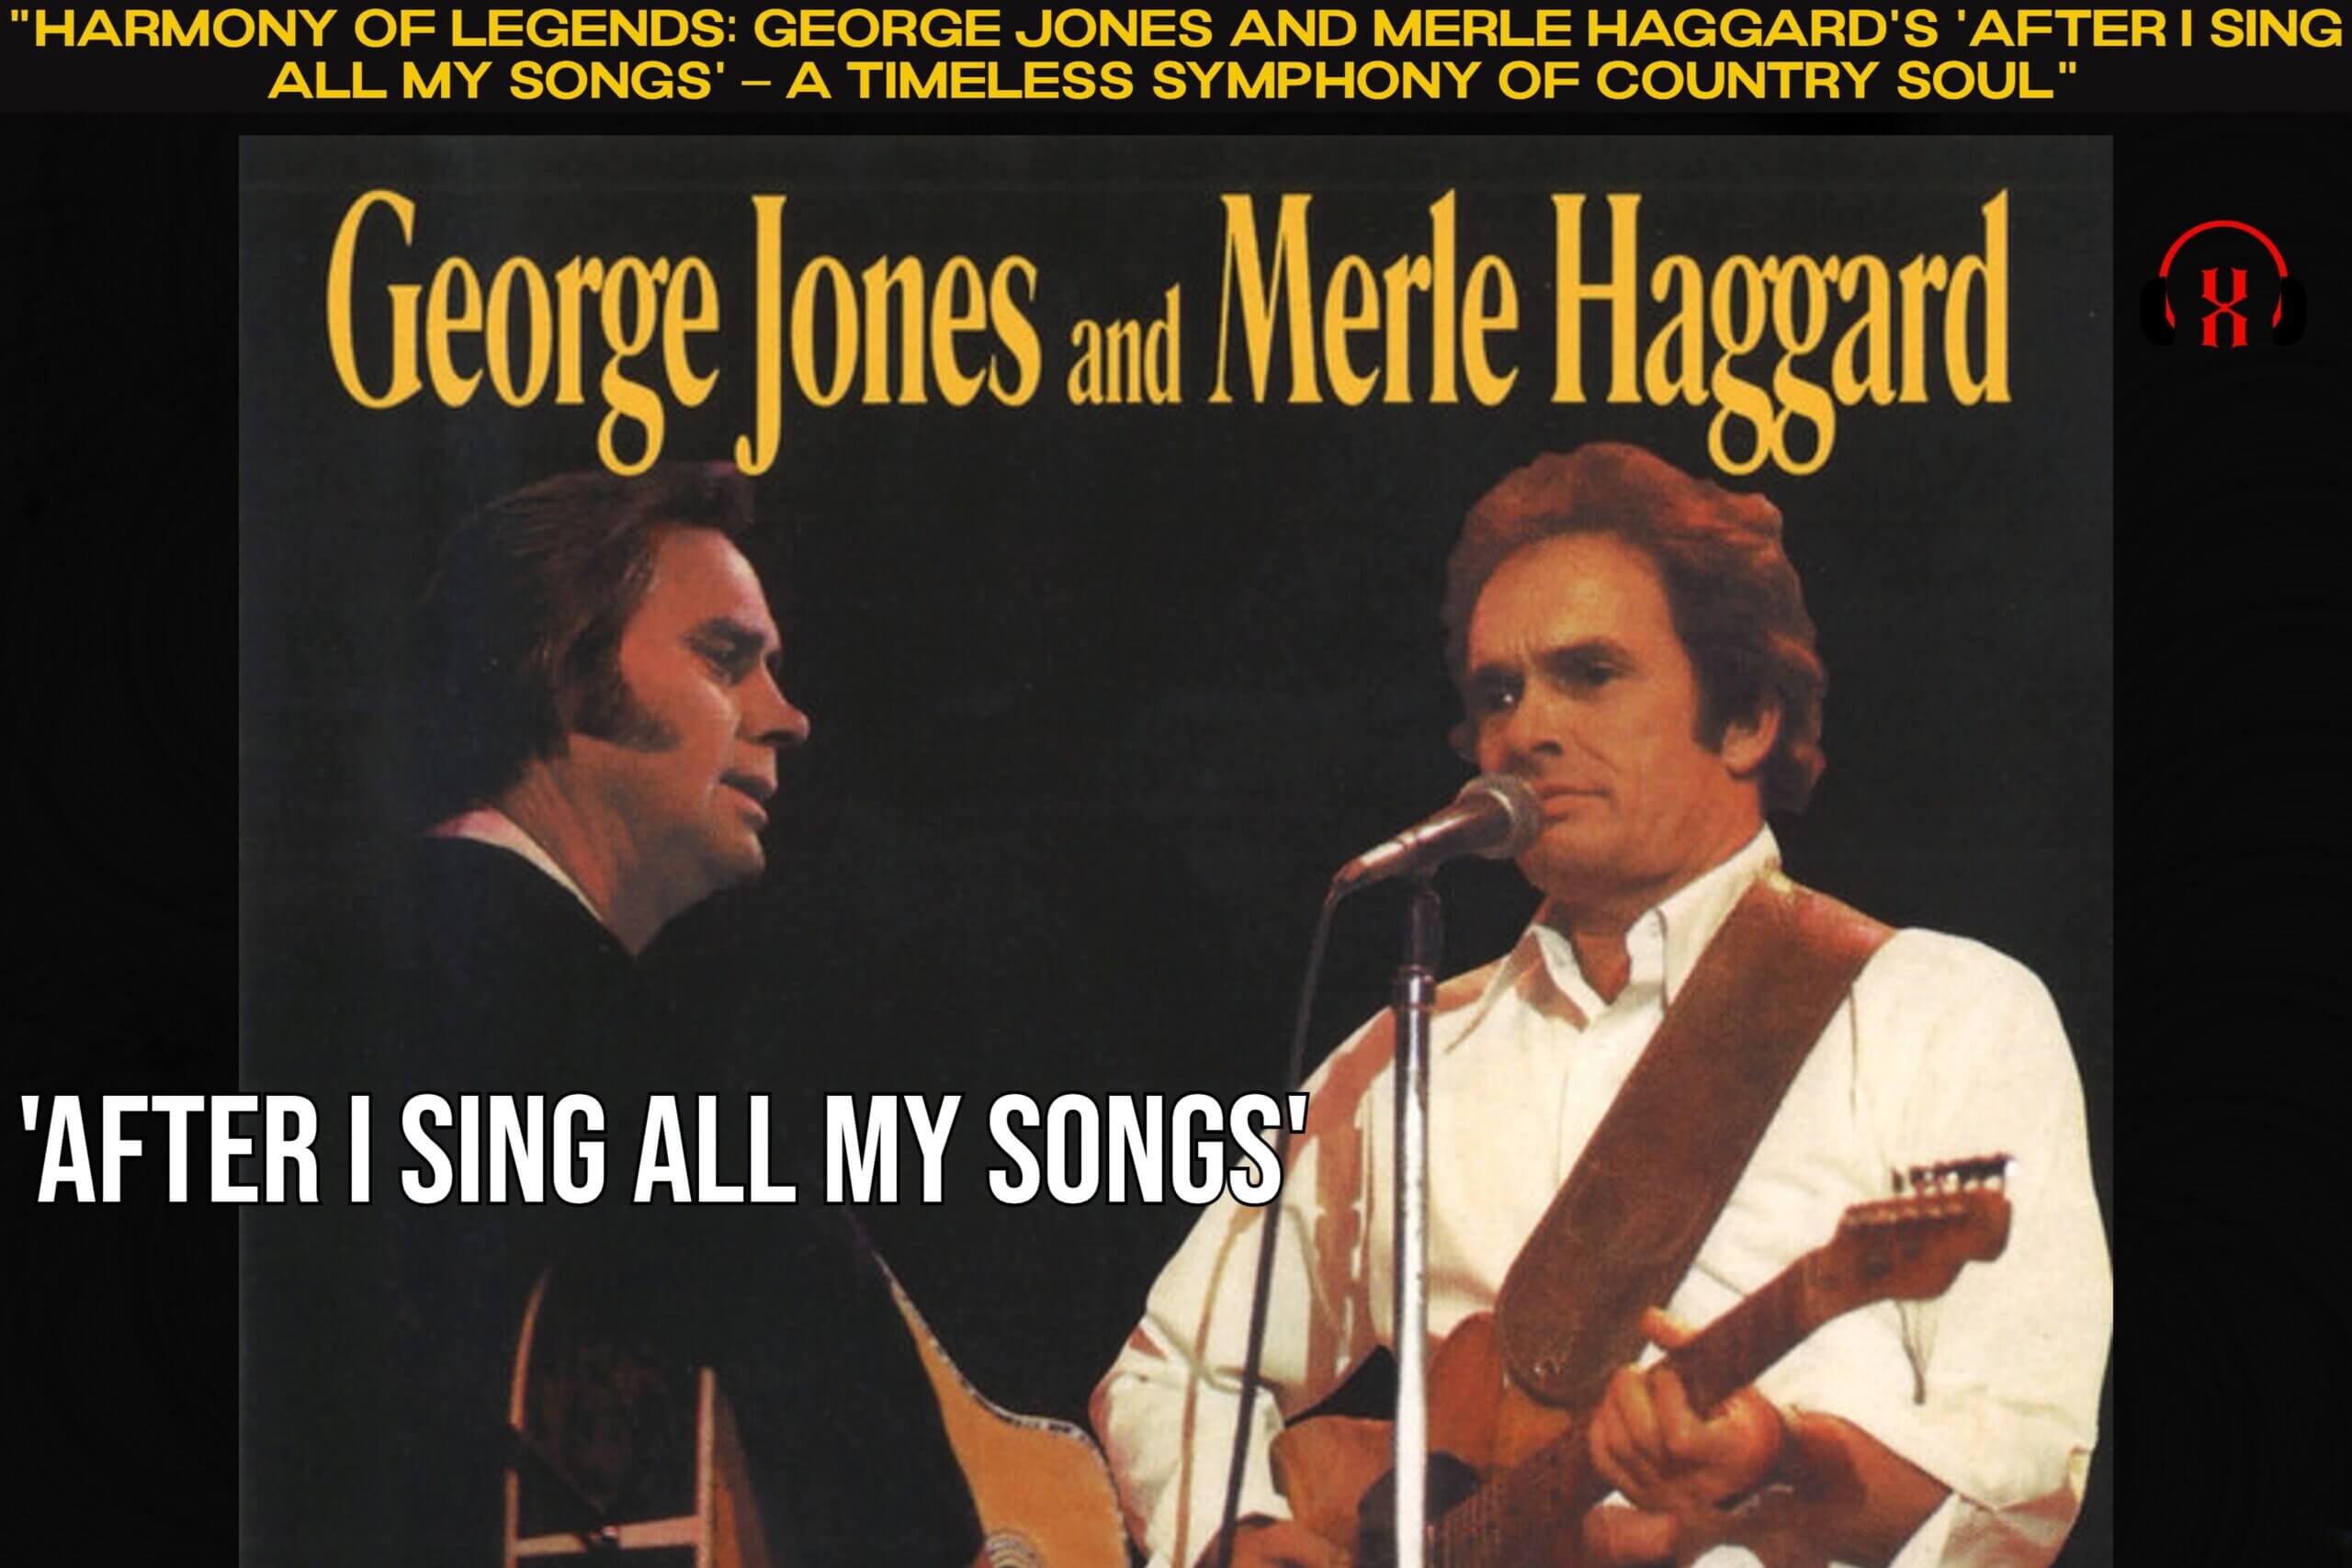 Harmony of Legends George Jones and Merle Haggard's 'After I Sing All My Songs' – A Timeless Symphony of Country Soul